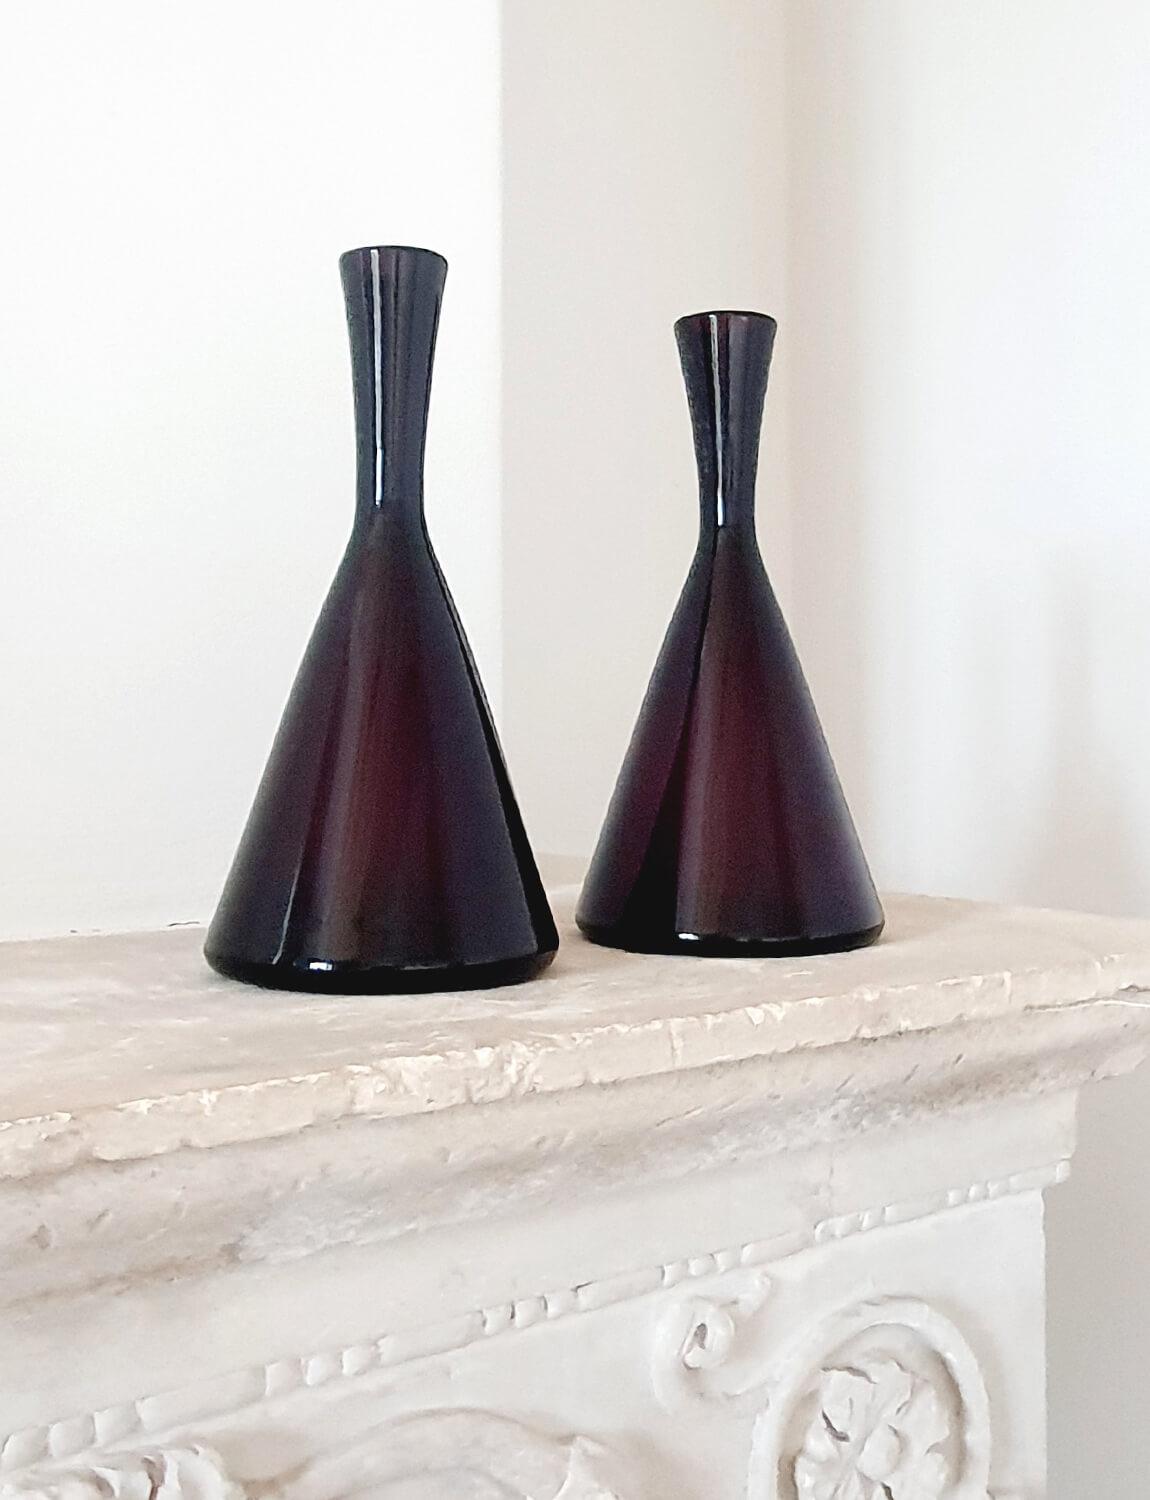 A pair of Italian hand-blown Empoli Glass wine bottles made in a cranberry coloured (dark purple) glass. These exceptional bottles were hand-blown in Empoli in the 1950s. In the last century Empoli in Tuscany was one of the most famous glass-blowing